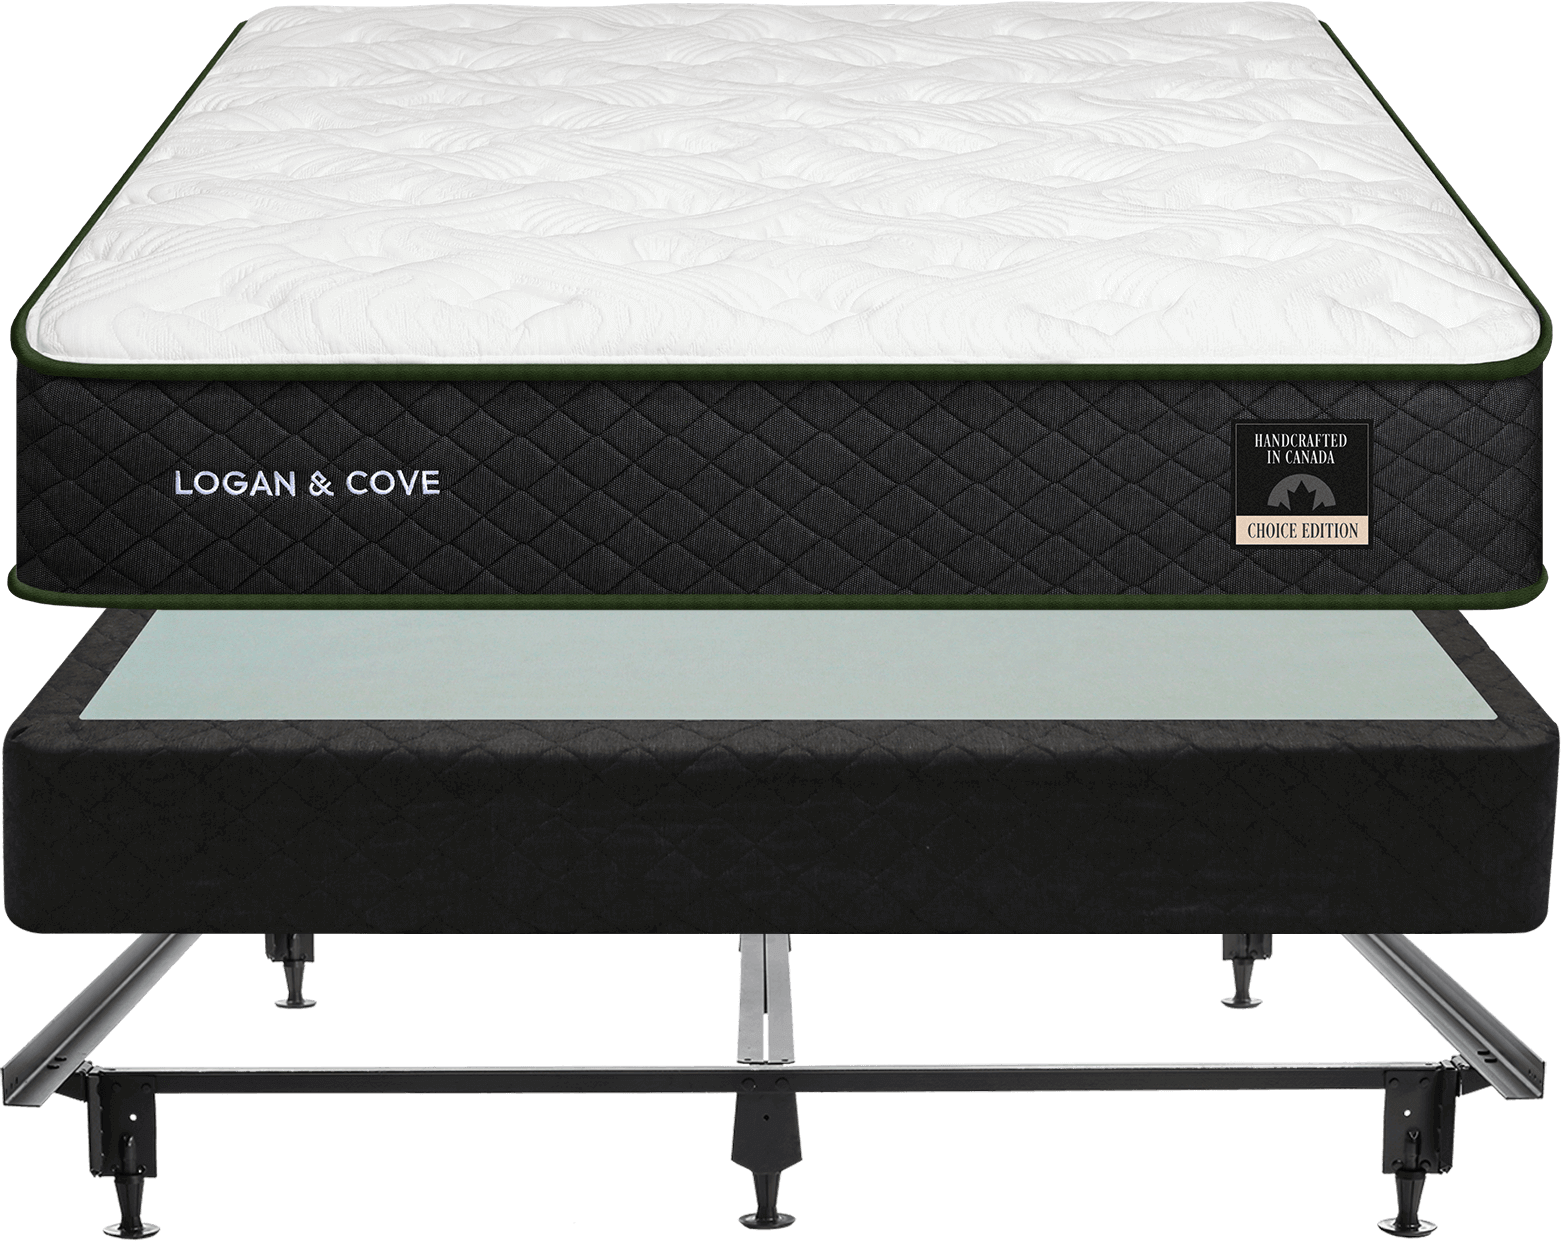 A Logan and Cove Mattress, Mattress Foundation, and Metal Bed Frame are perfectly matched for use together.